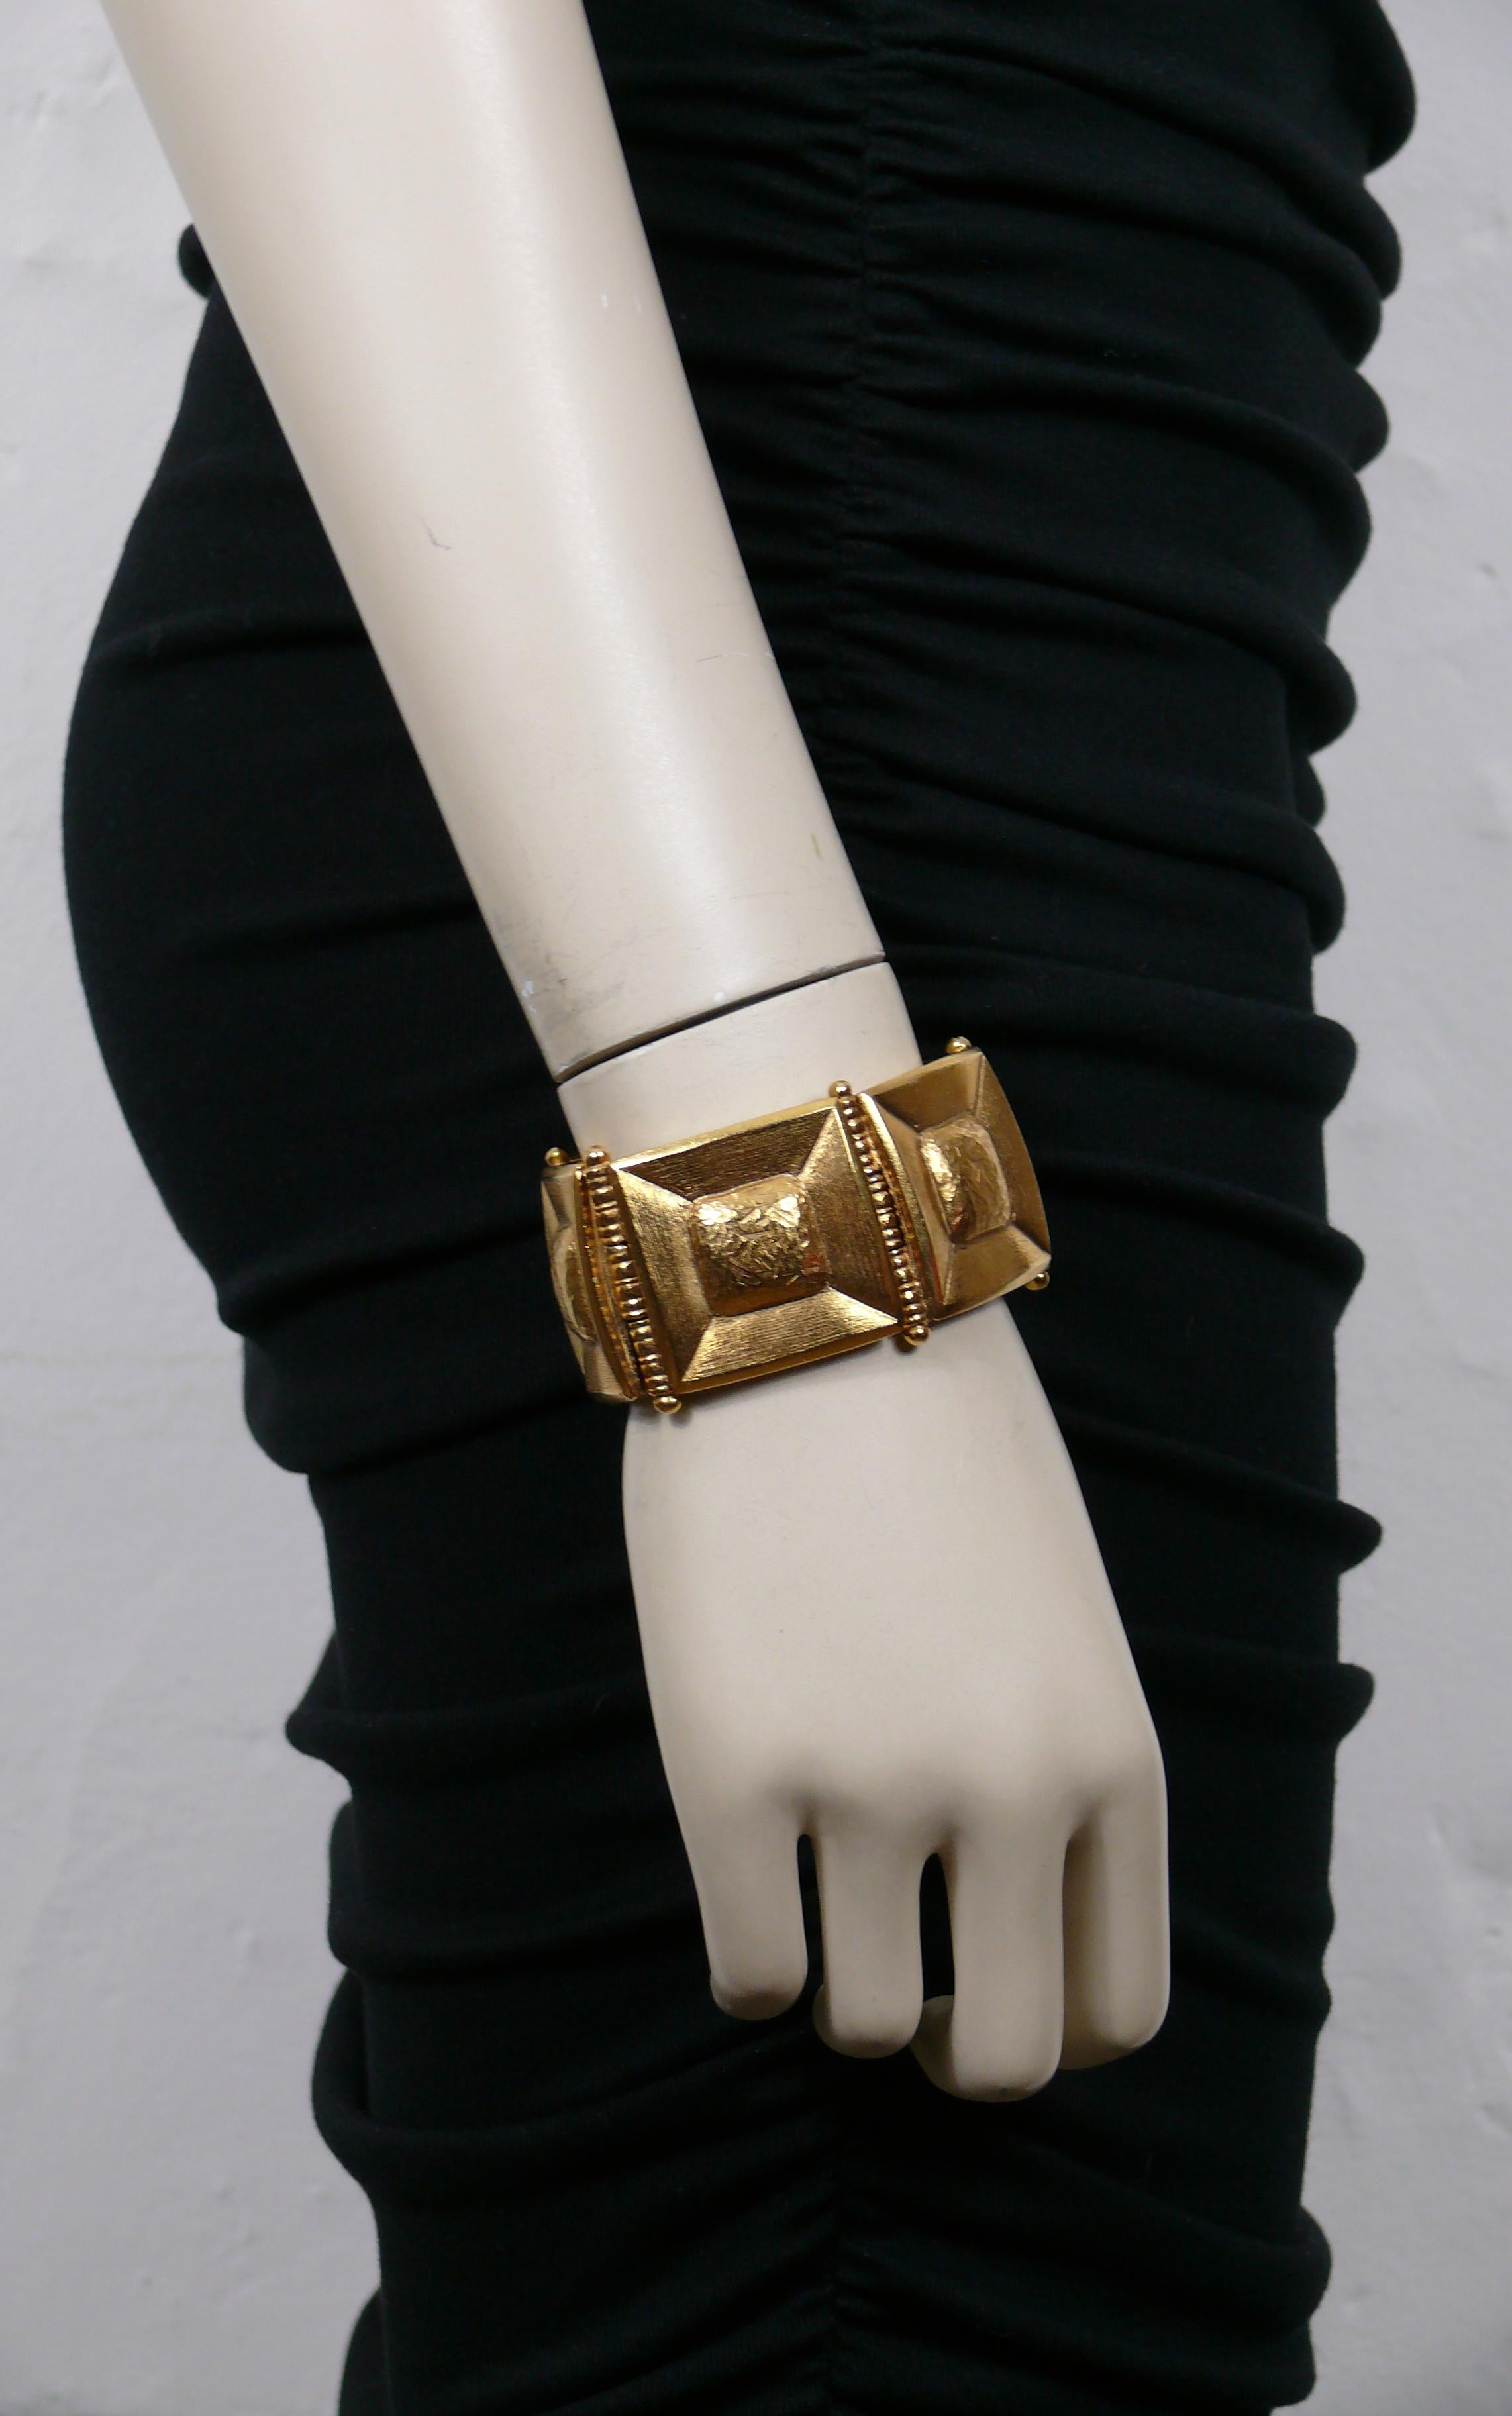 JEAN LOUIS SCHERRER vintage gold tone square-shaped link bracelet.

Hook clasp closure.

Marked SCHERRER Paris.
Made in France.

Indicative measurements : length approx. 17.7 cm (6.97 inches) / height of the links approx. 3.2 cm (1.26